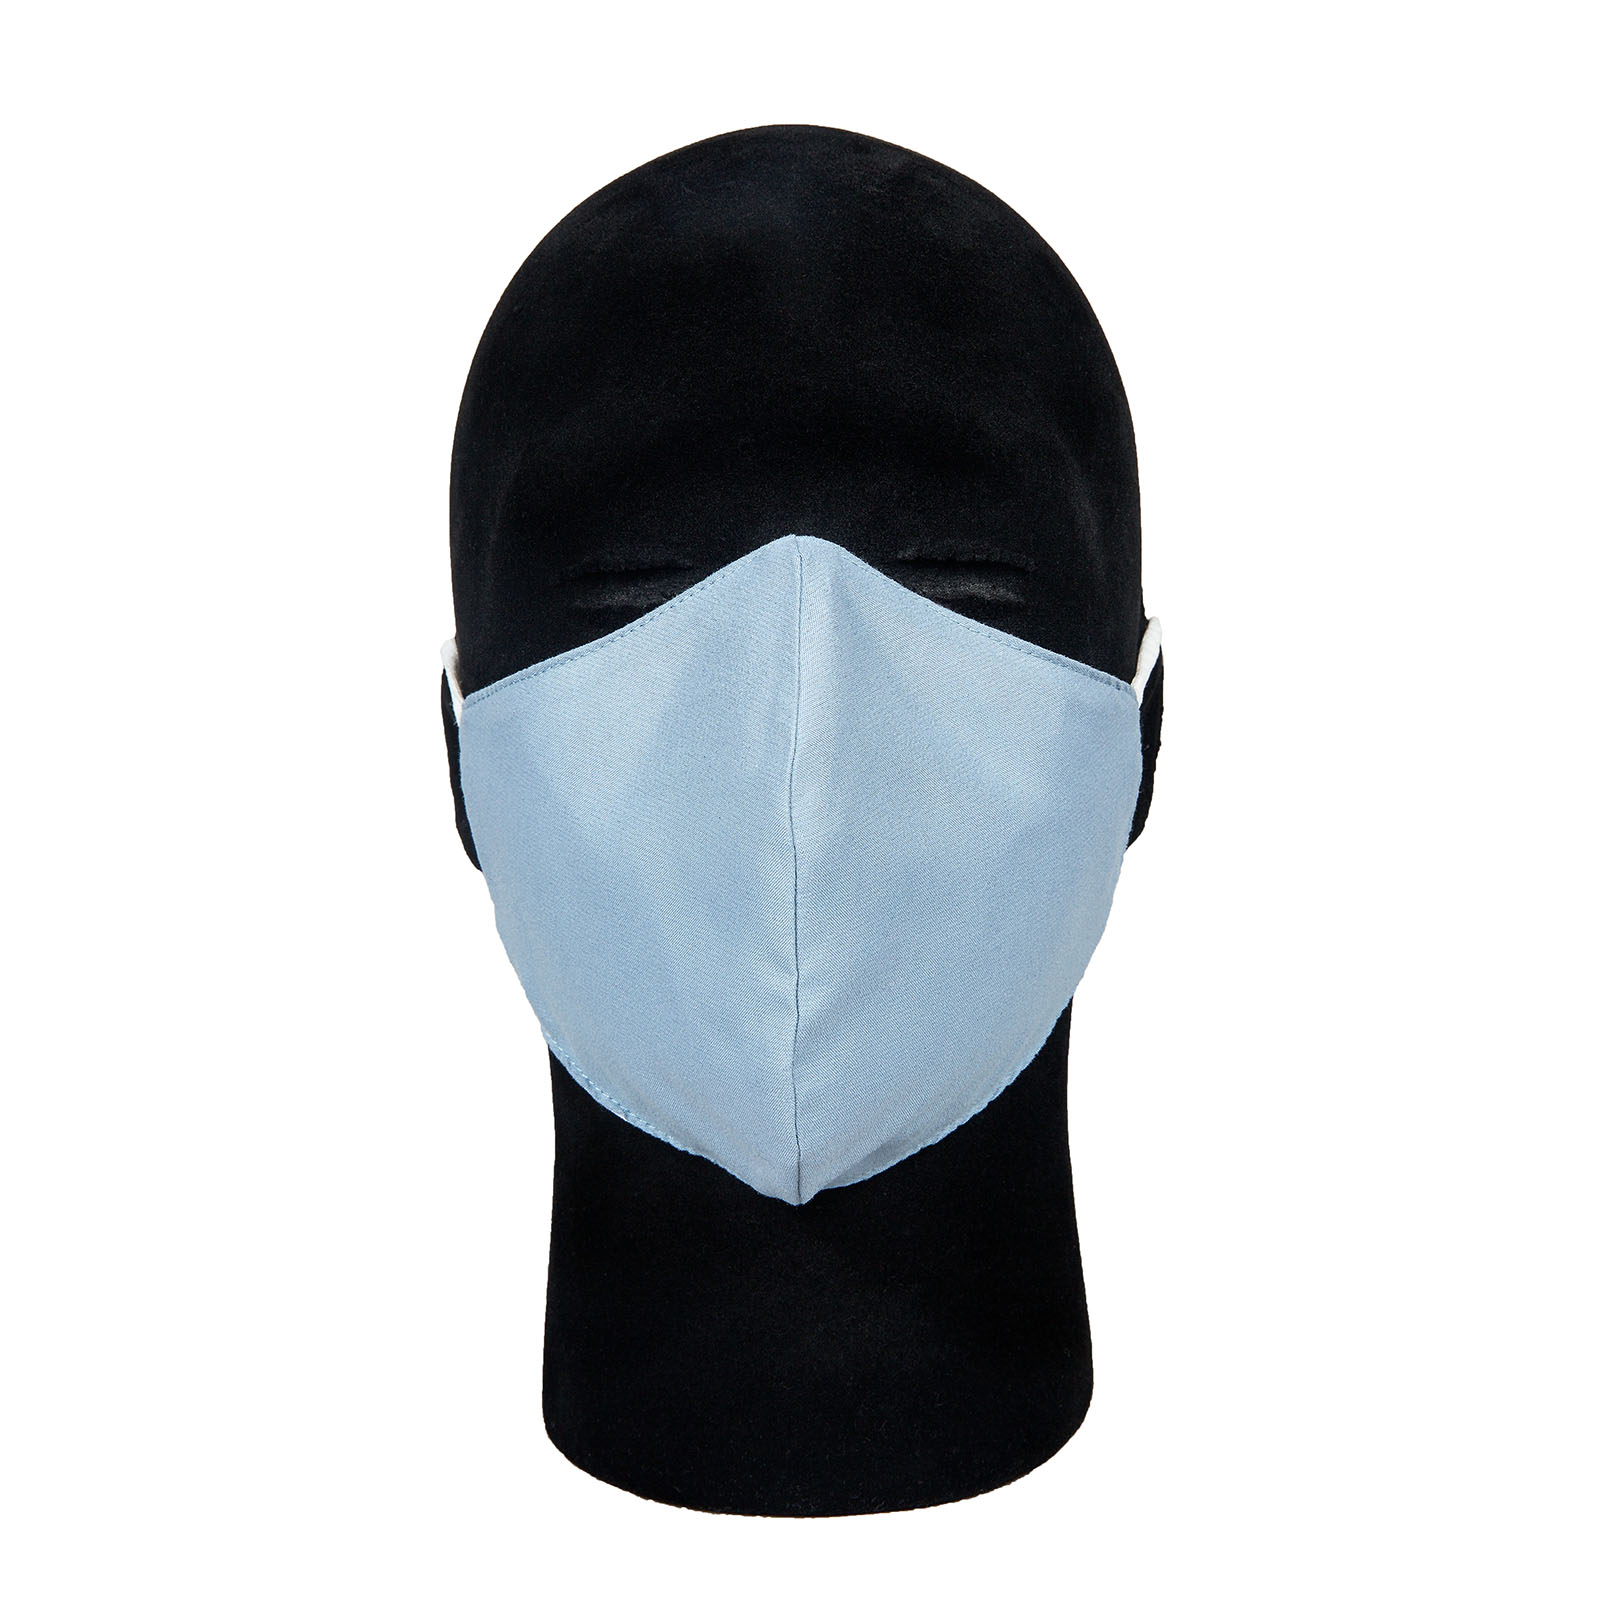 ValuBran Reusable Protective Face Mask Covers